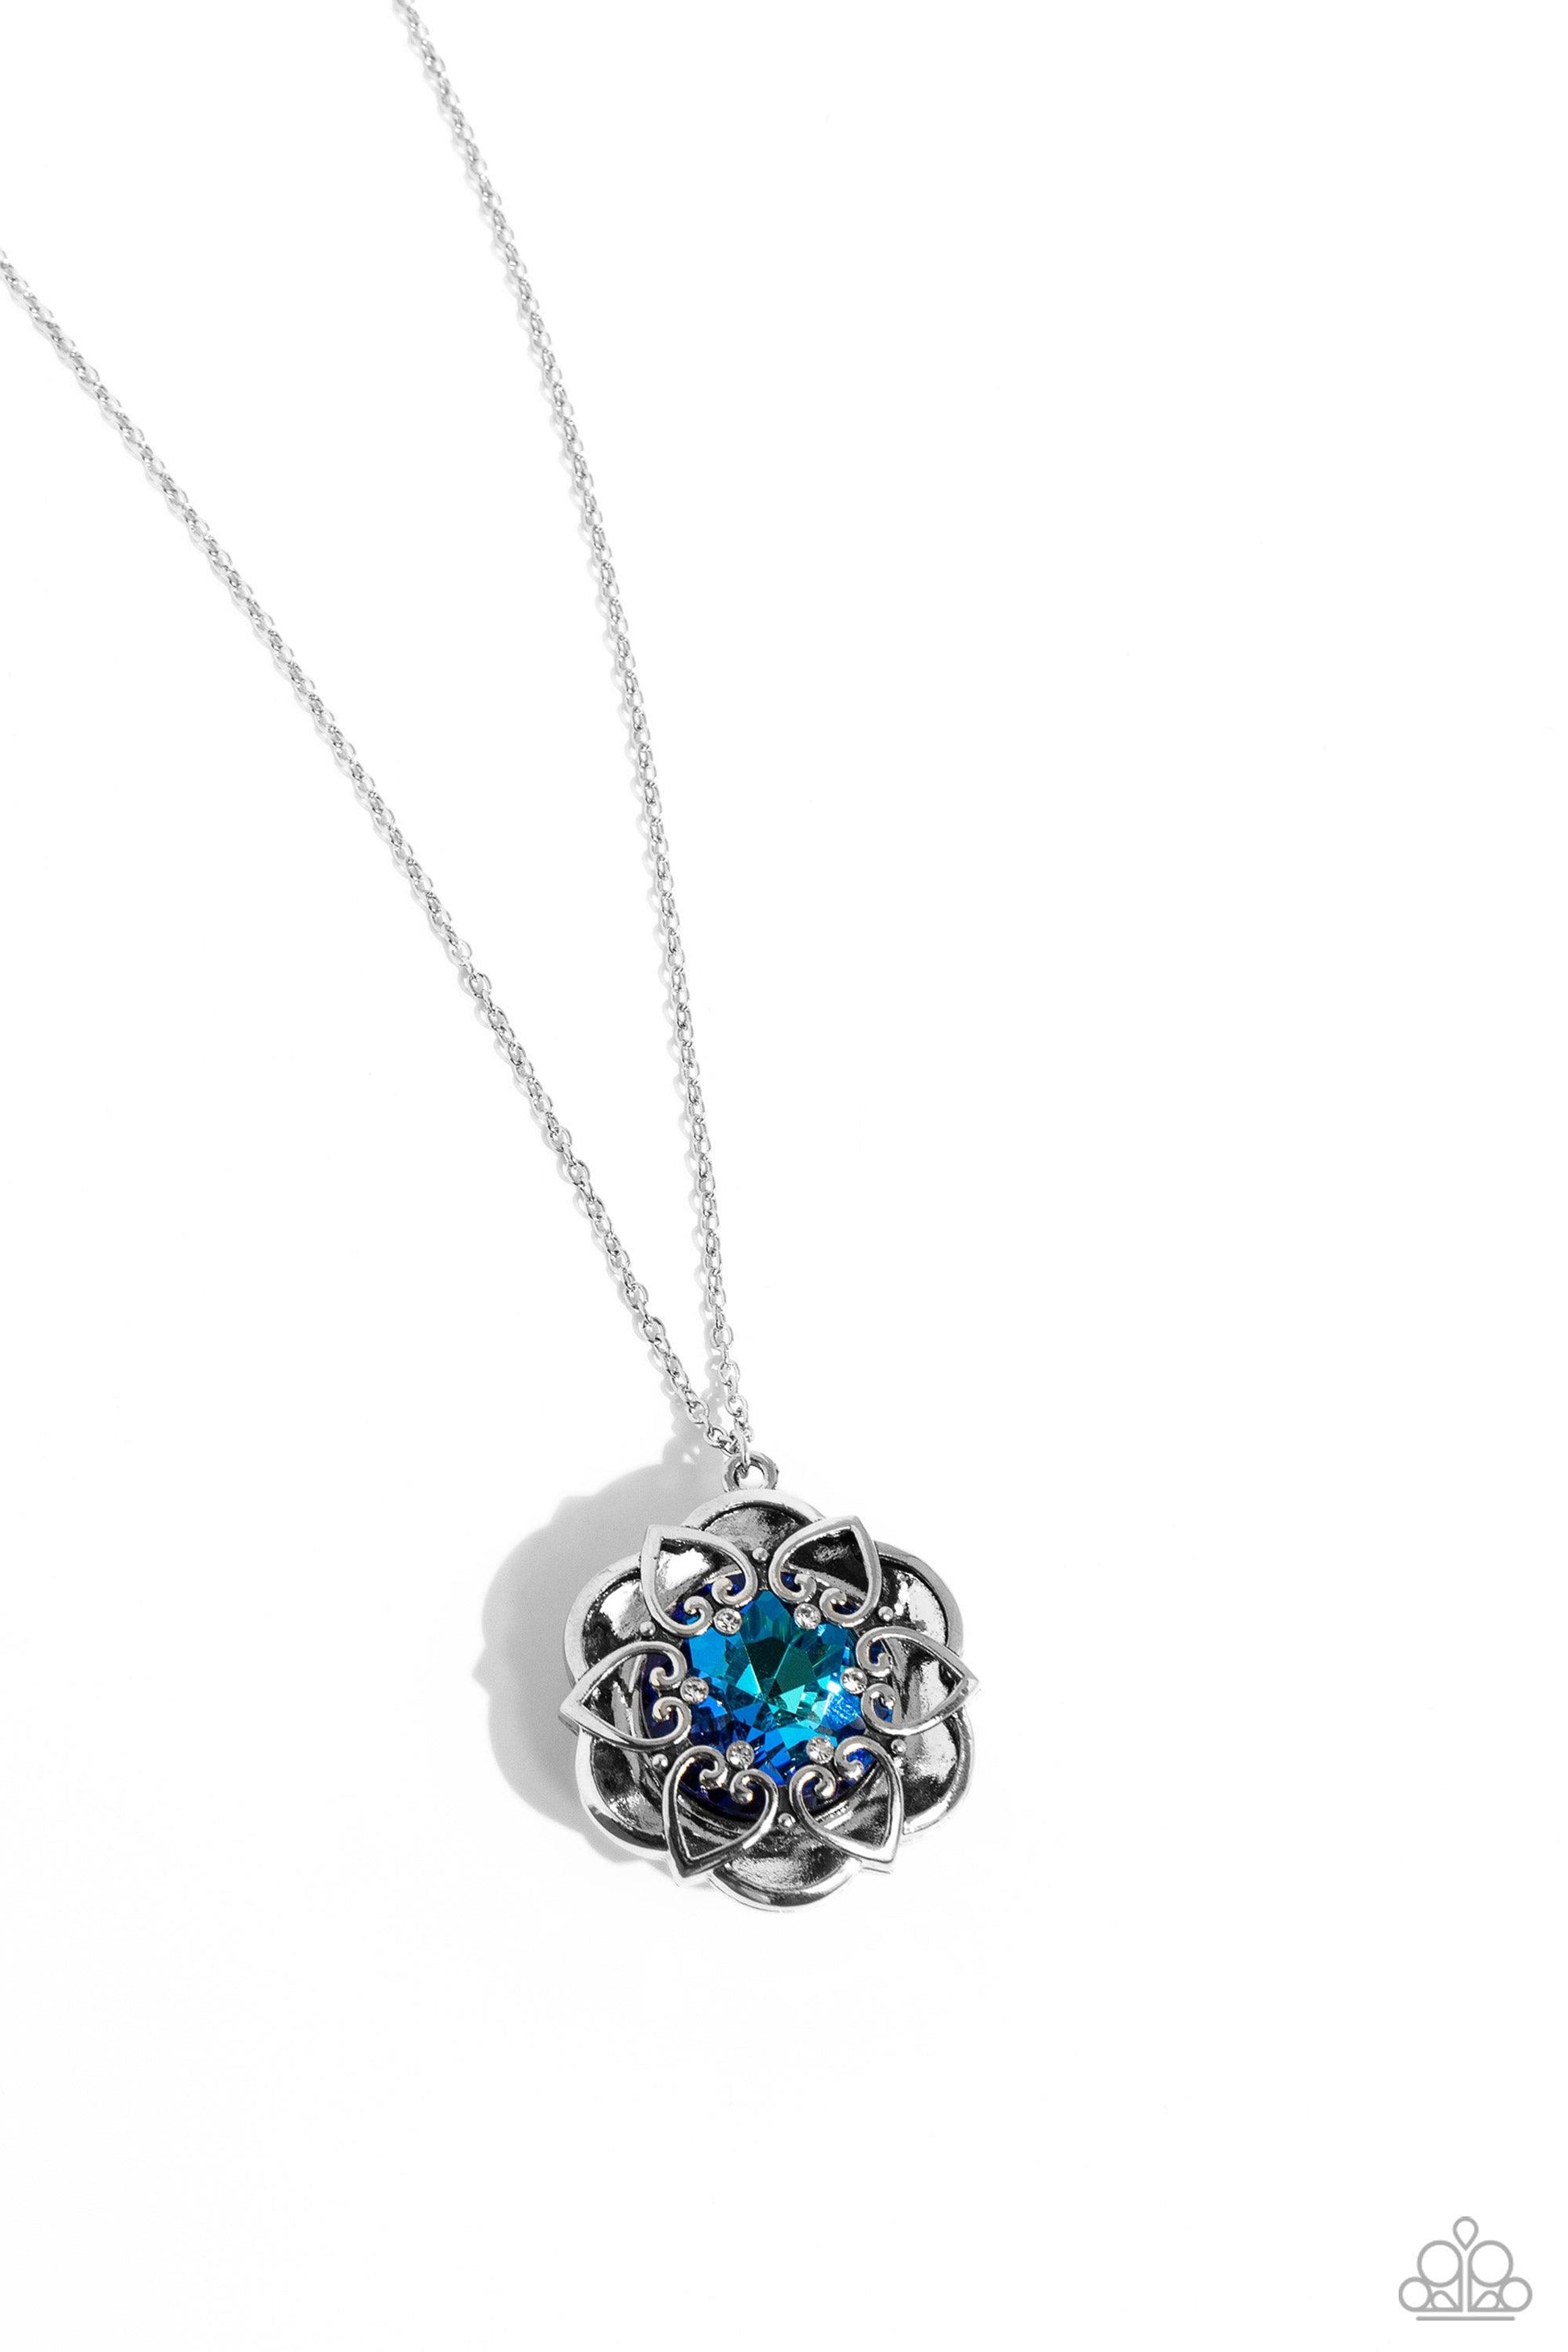 Paparazzi Accessories - Flowering Fantasy - Blue Necklace - Bling by JessieK